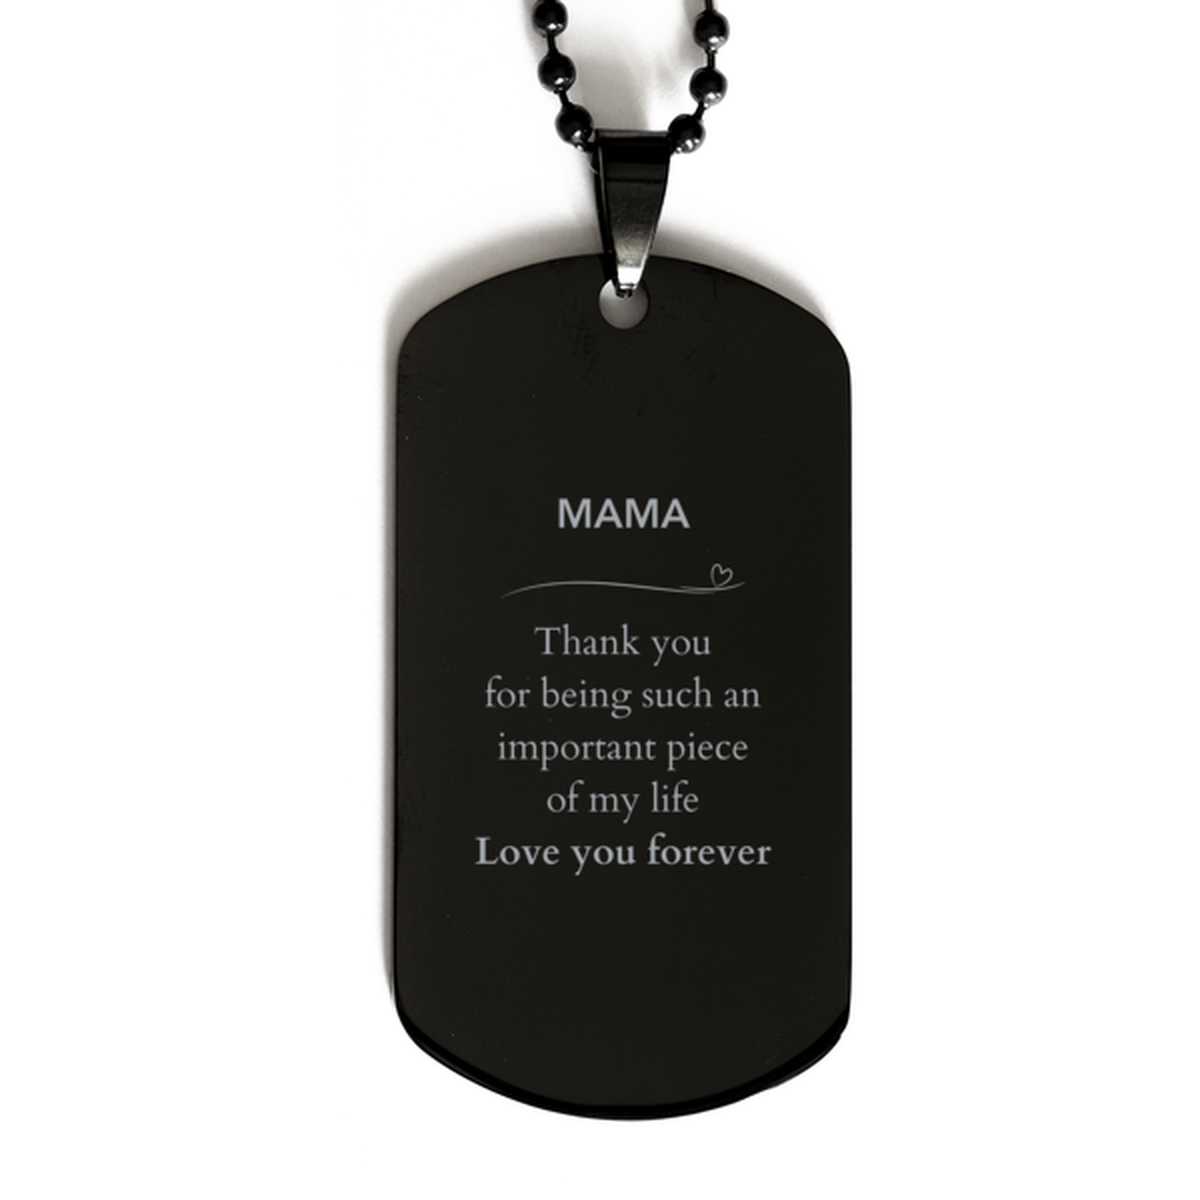 Appropriate Mama Black Dog Tag Epic Birthday Gifts for Mama Thank you for being such an important piece of my life Mama Christmas Mothers Fathers Day